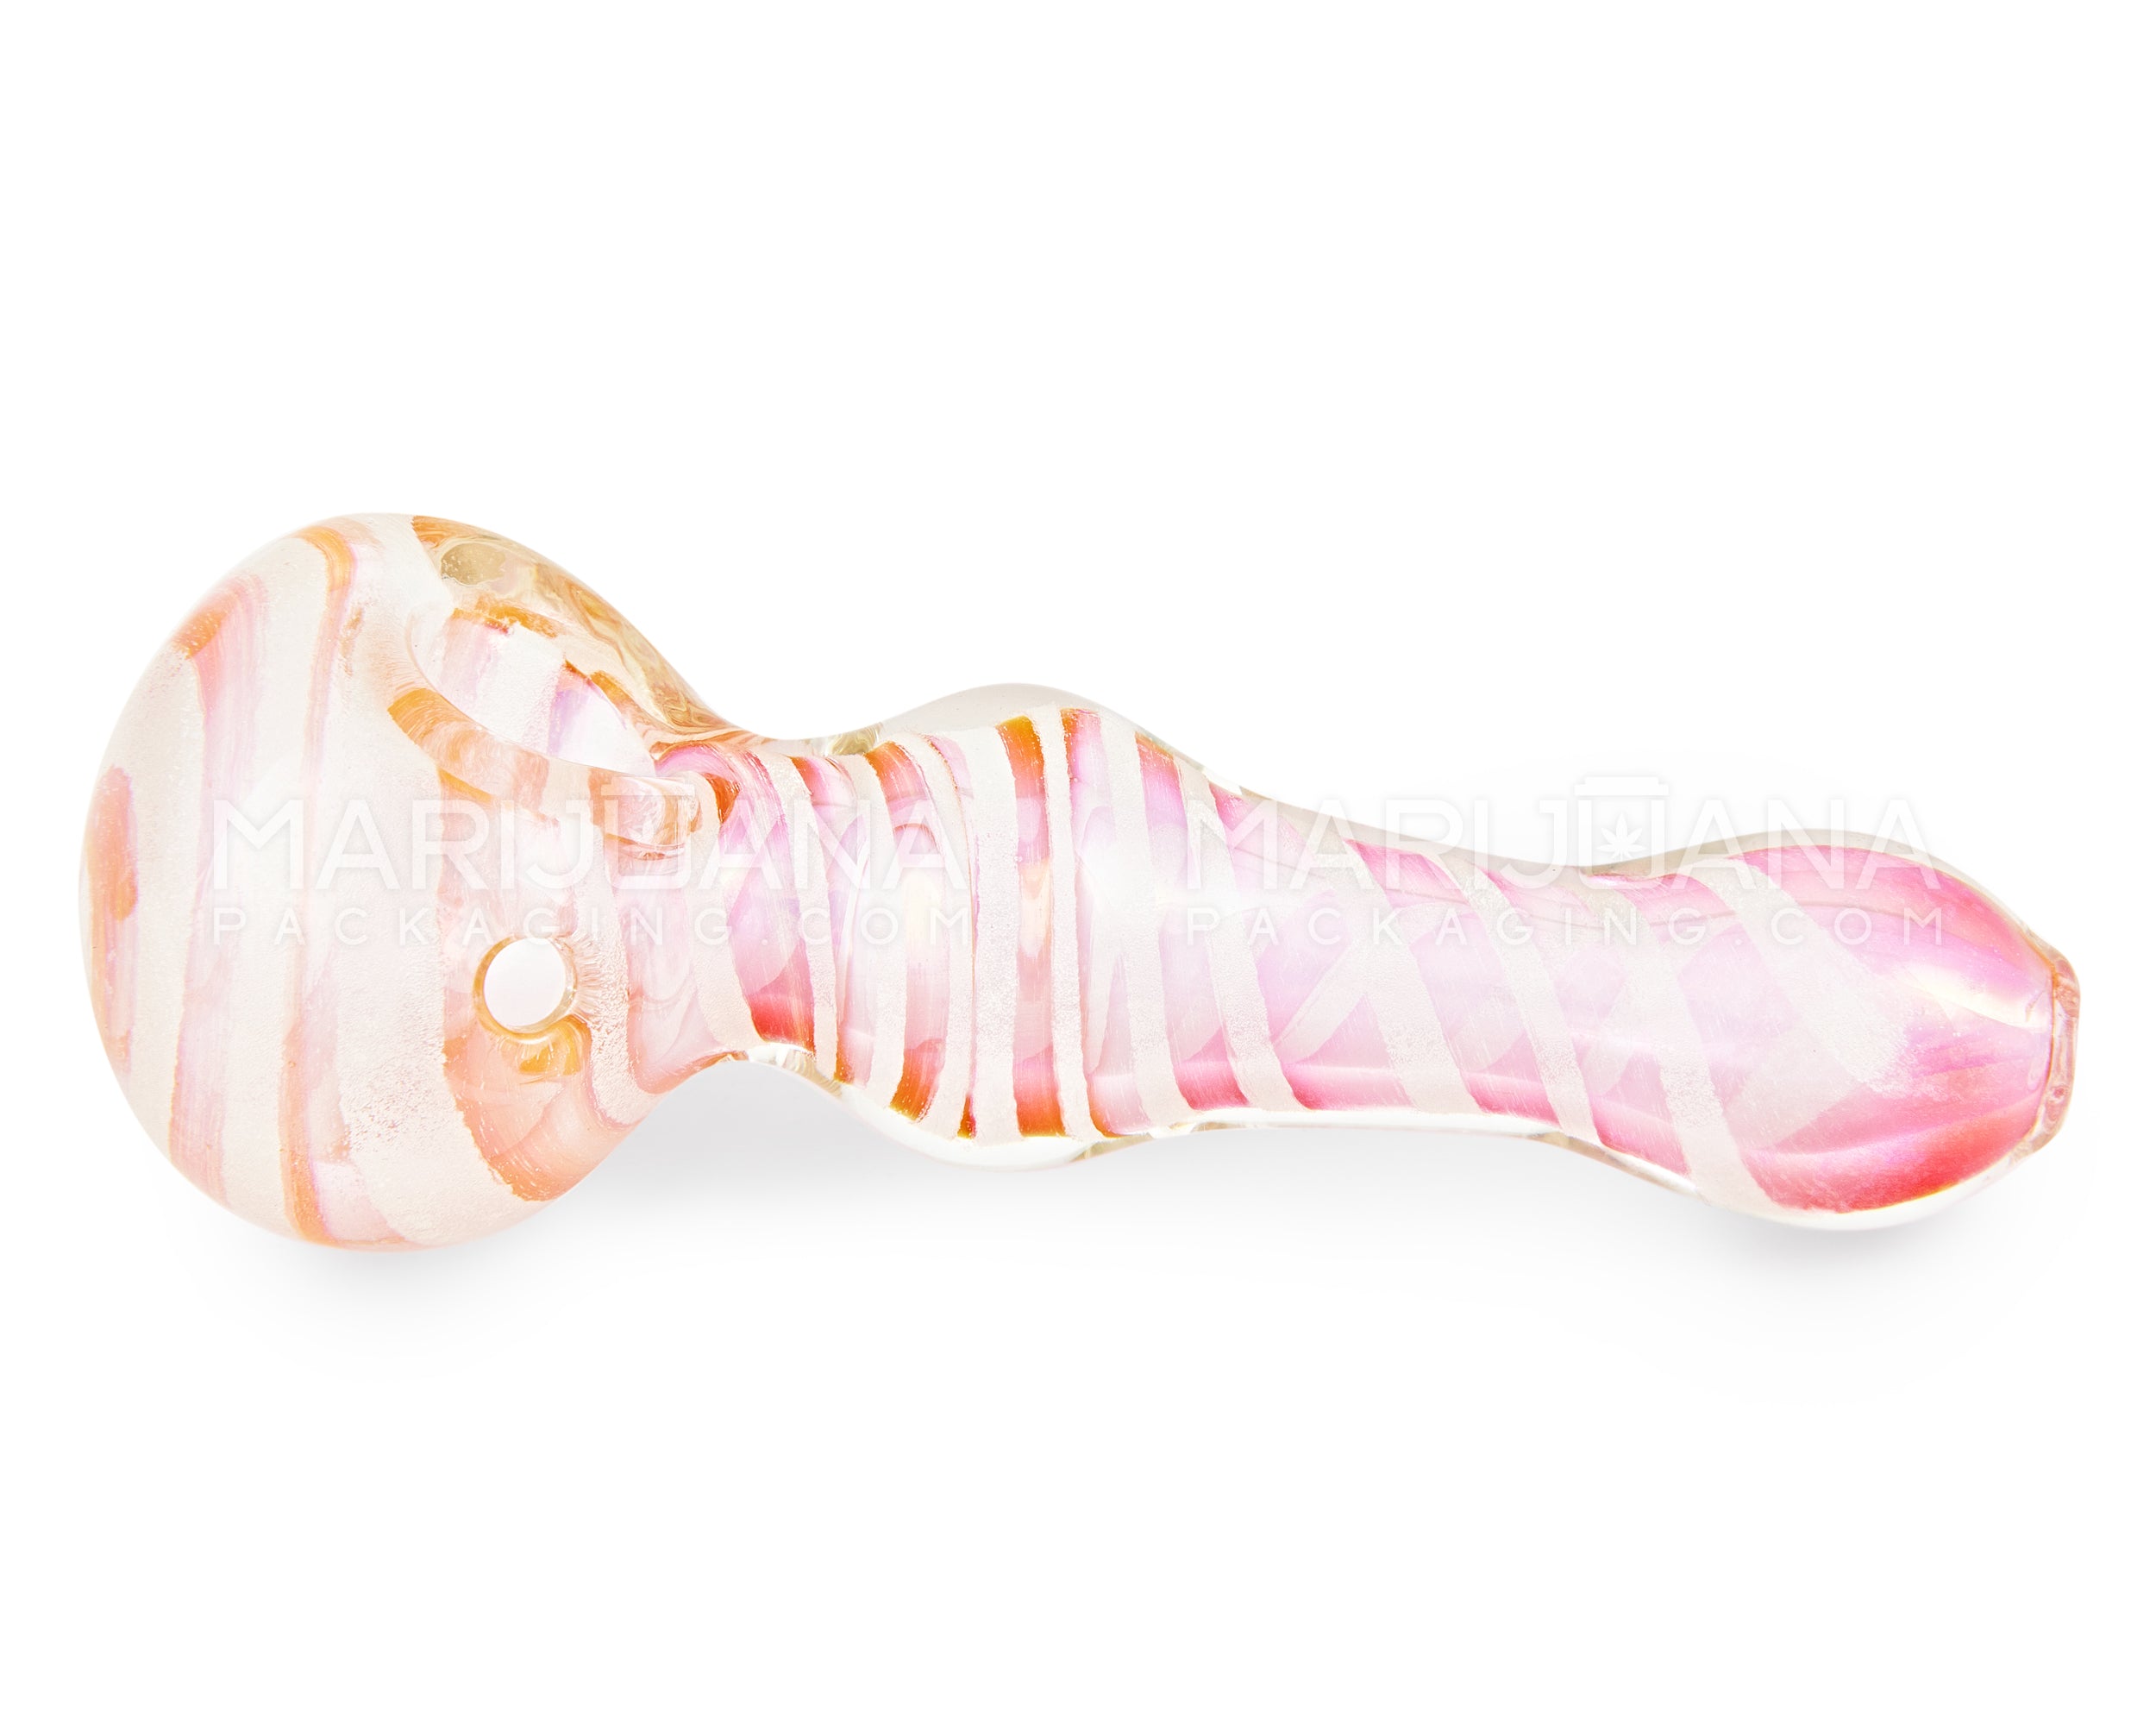 Glow-in-the-Dark | Spiral Pink Fumed Spiral Bulged Spoon Hand Pipe | 4.5in Long - Glass - Pink - 5